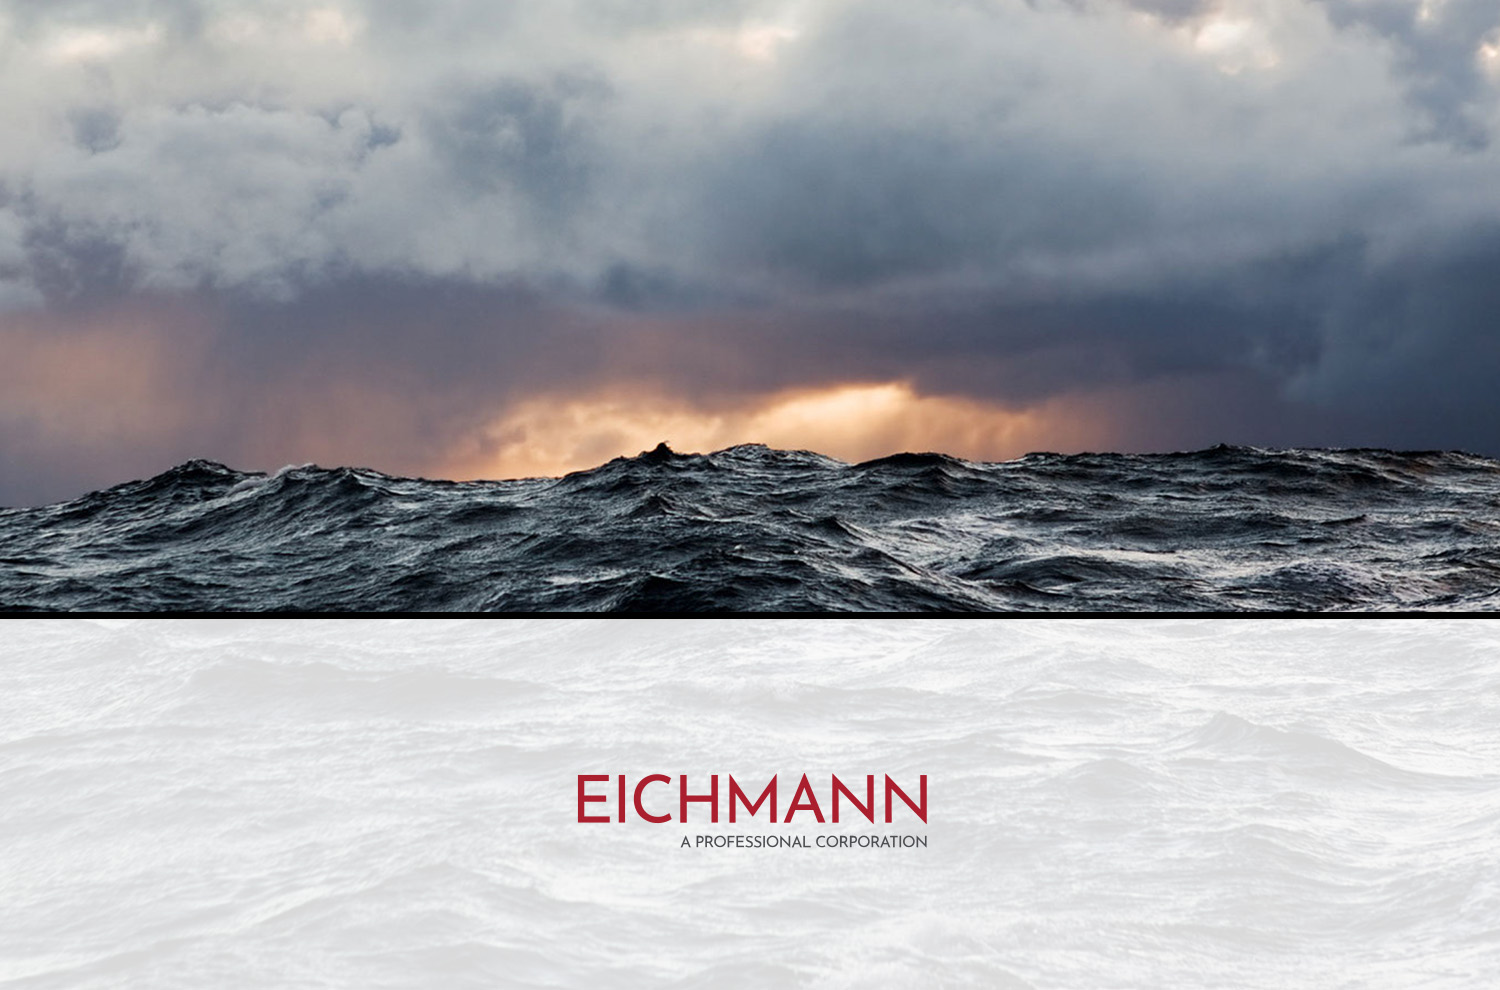 Image of Image collage featuring a view of the sea with the sun shining through and a logo for Eichmann